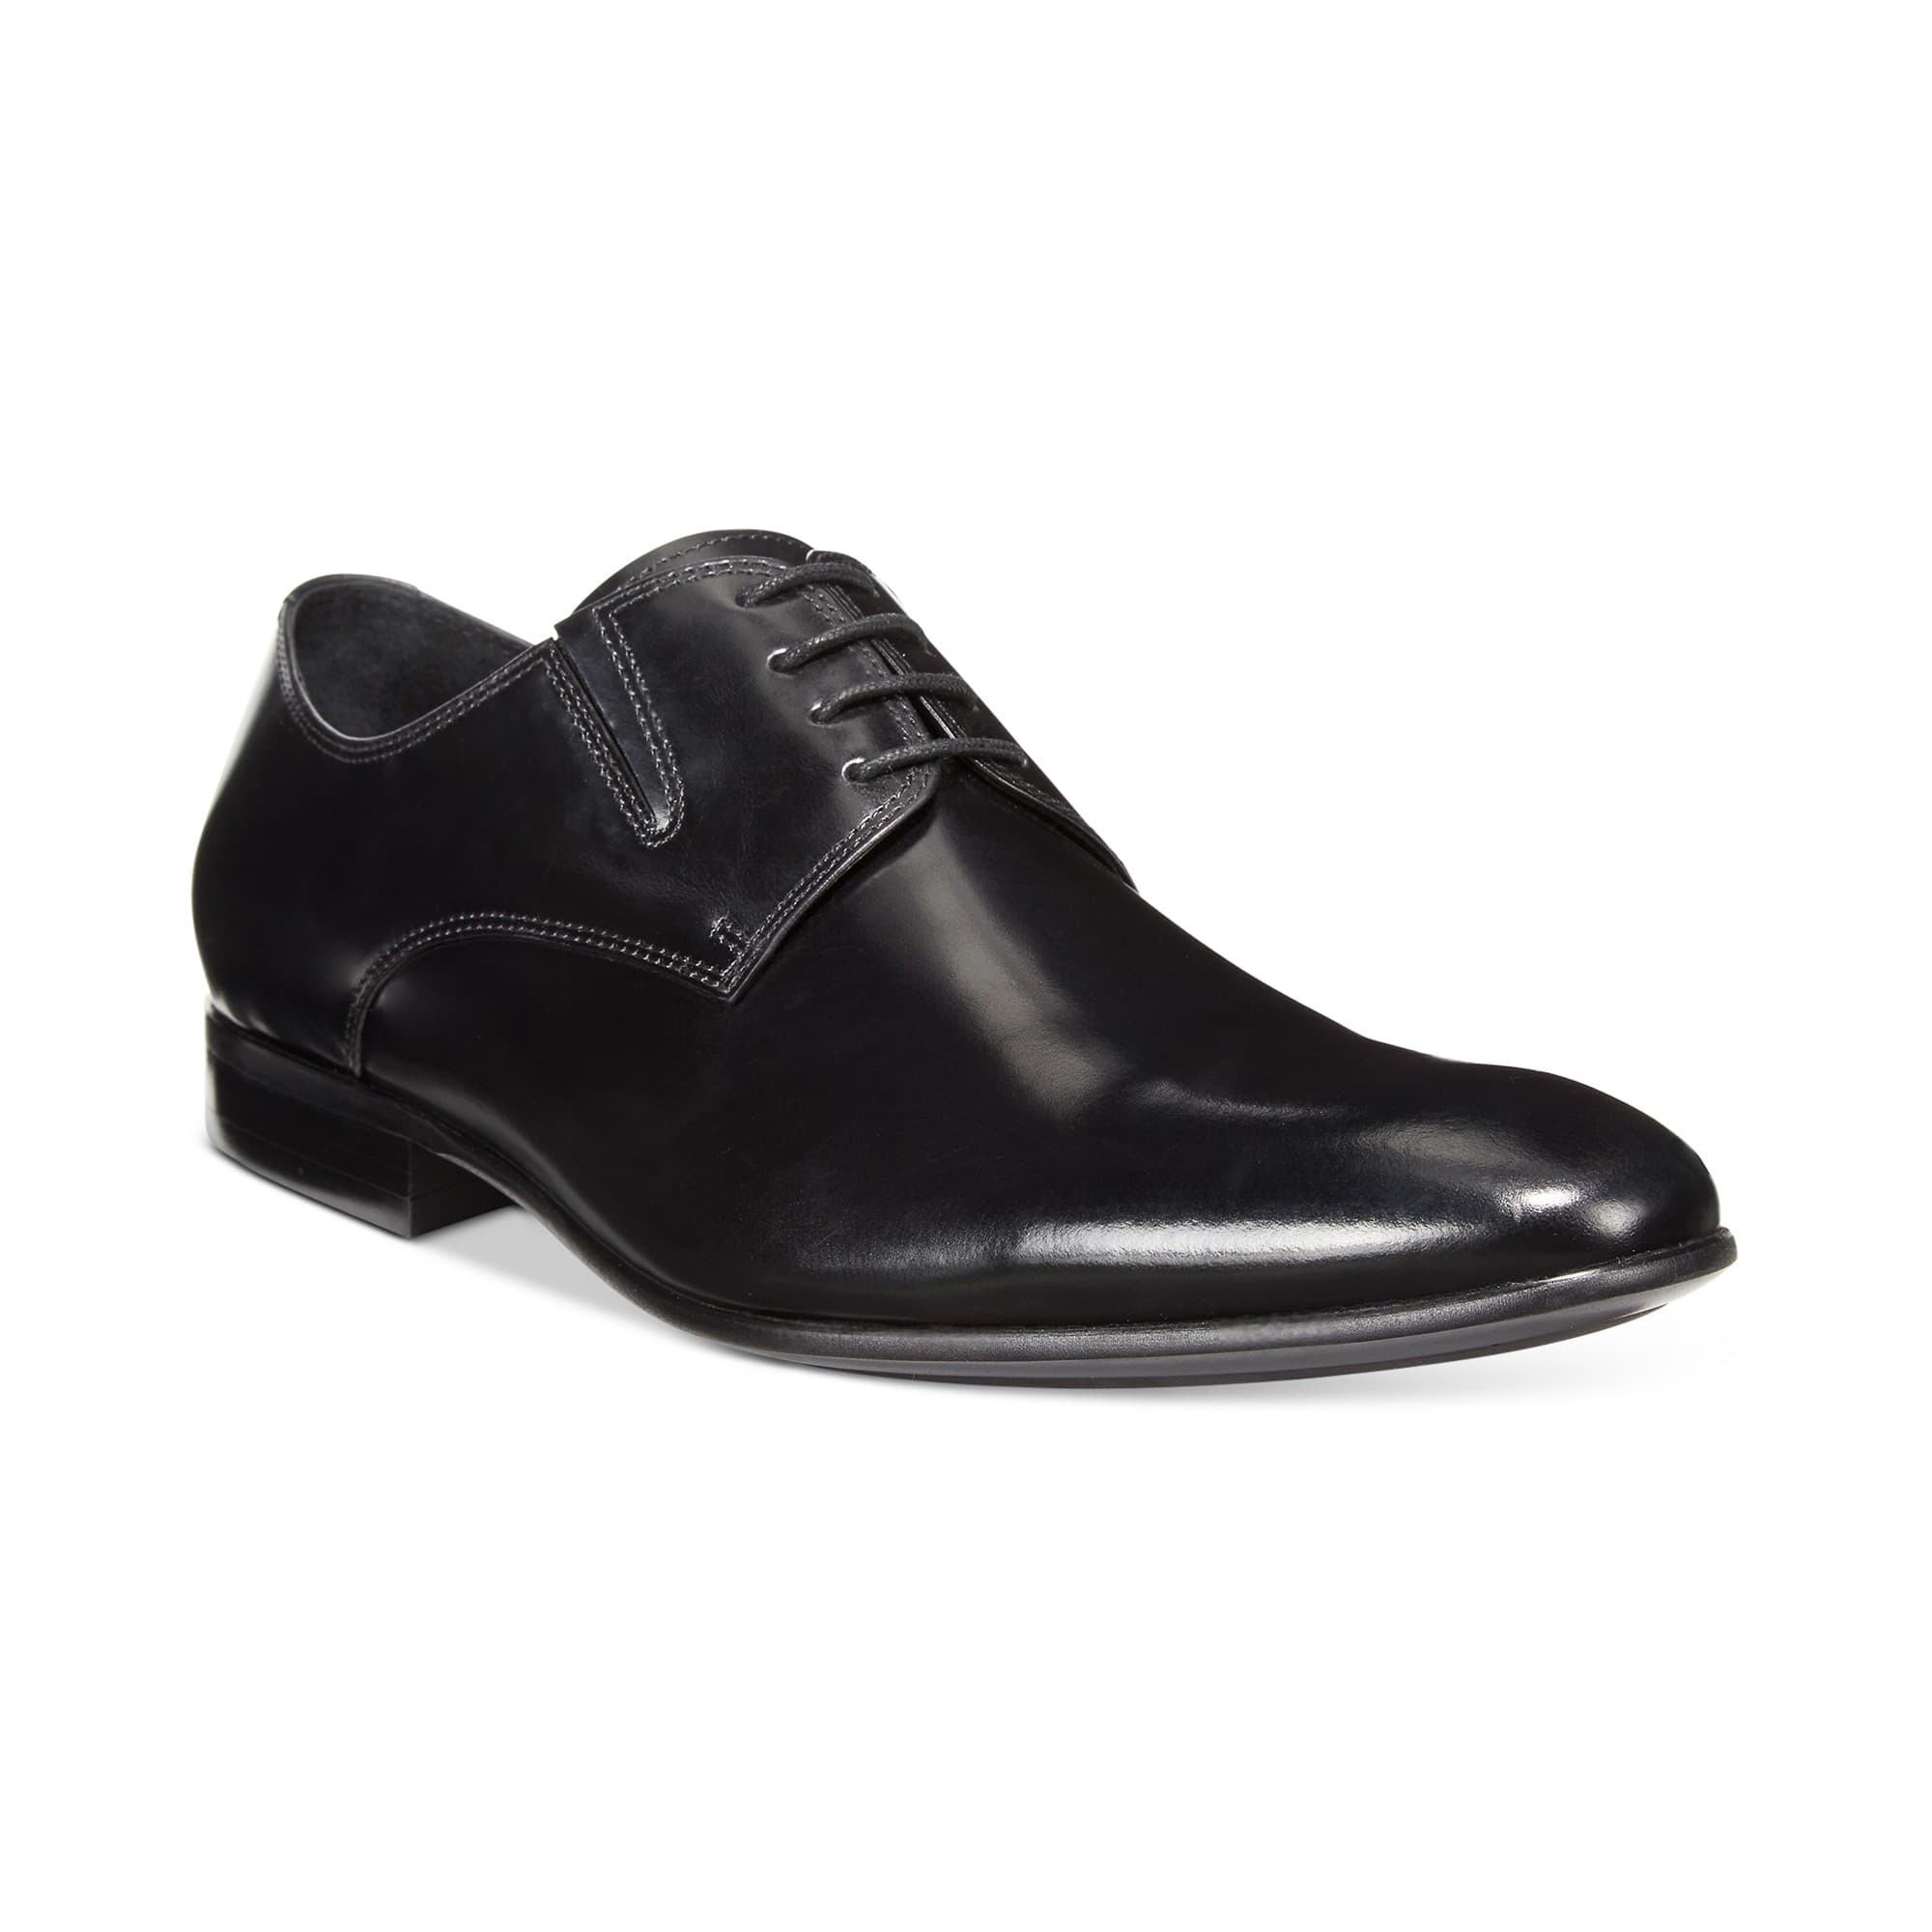 woocommerce-673321-2209615.cloudwaysapps.com-kenneth-cole-new-york-mens-black-leather-mix-er-oxfords-shoes